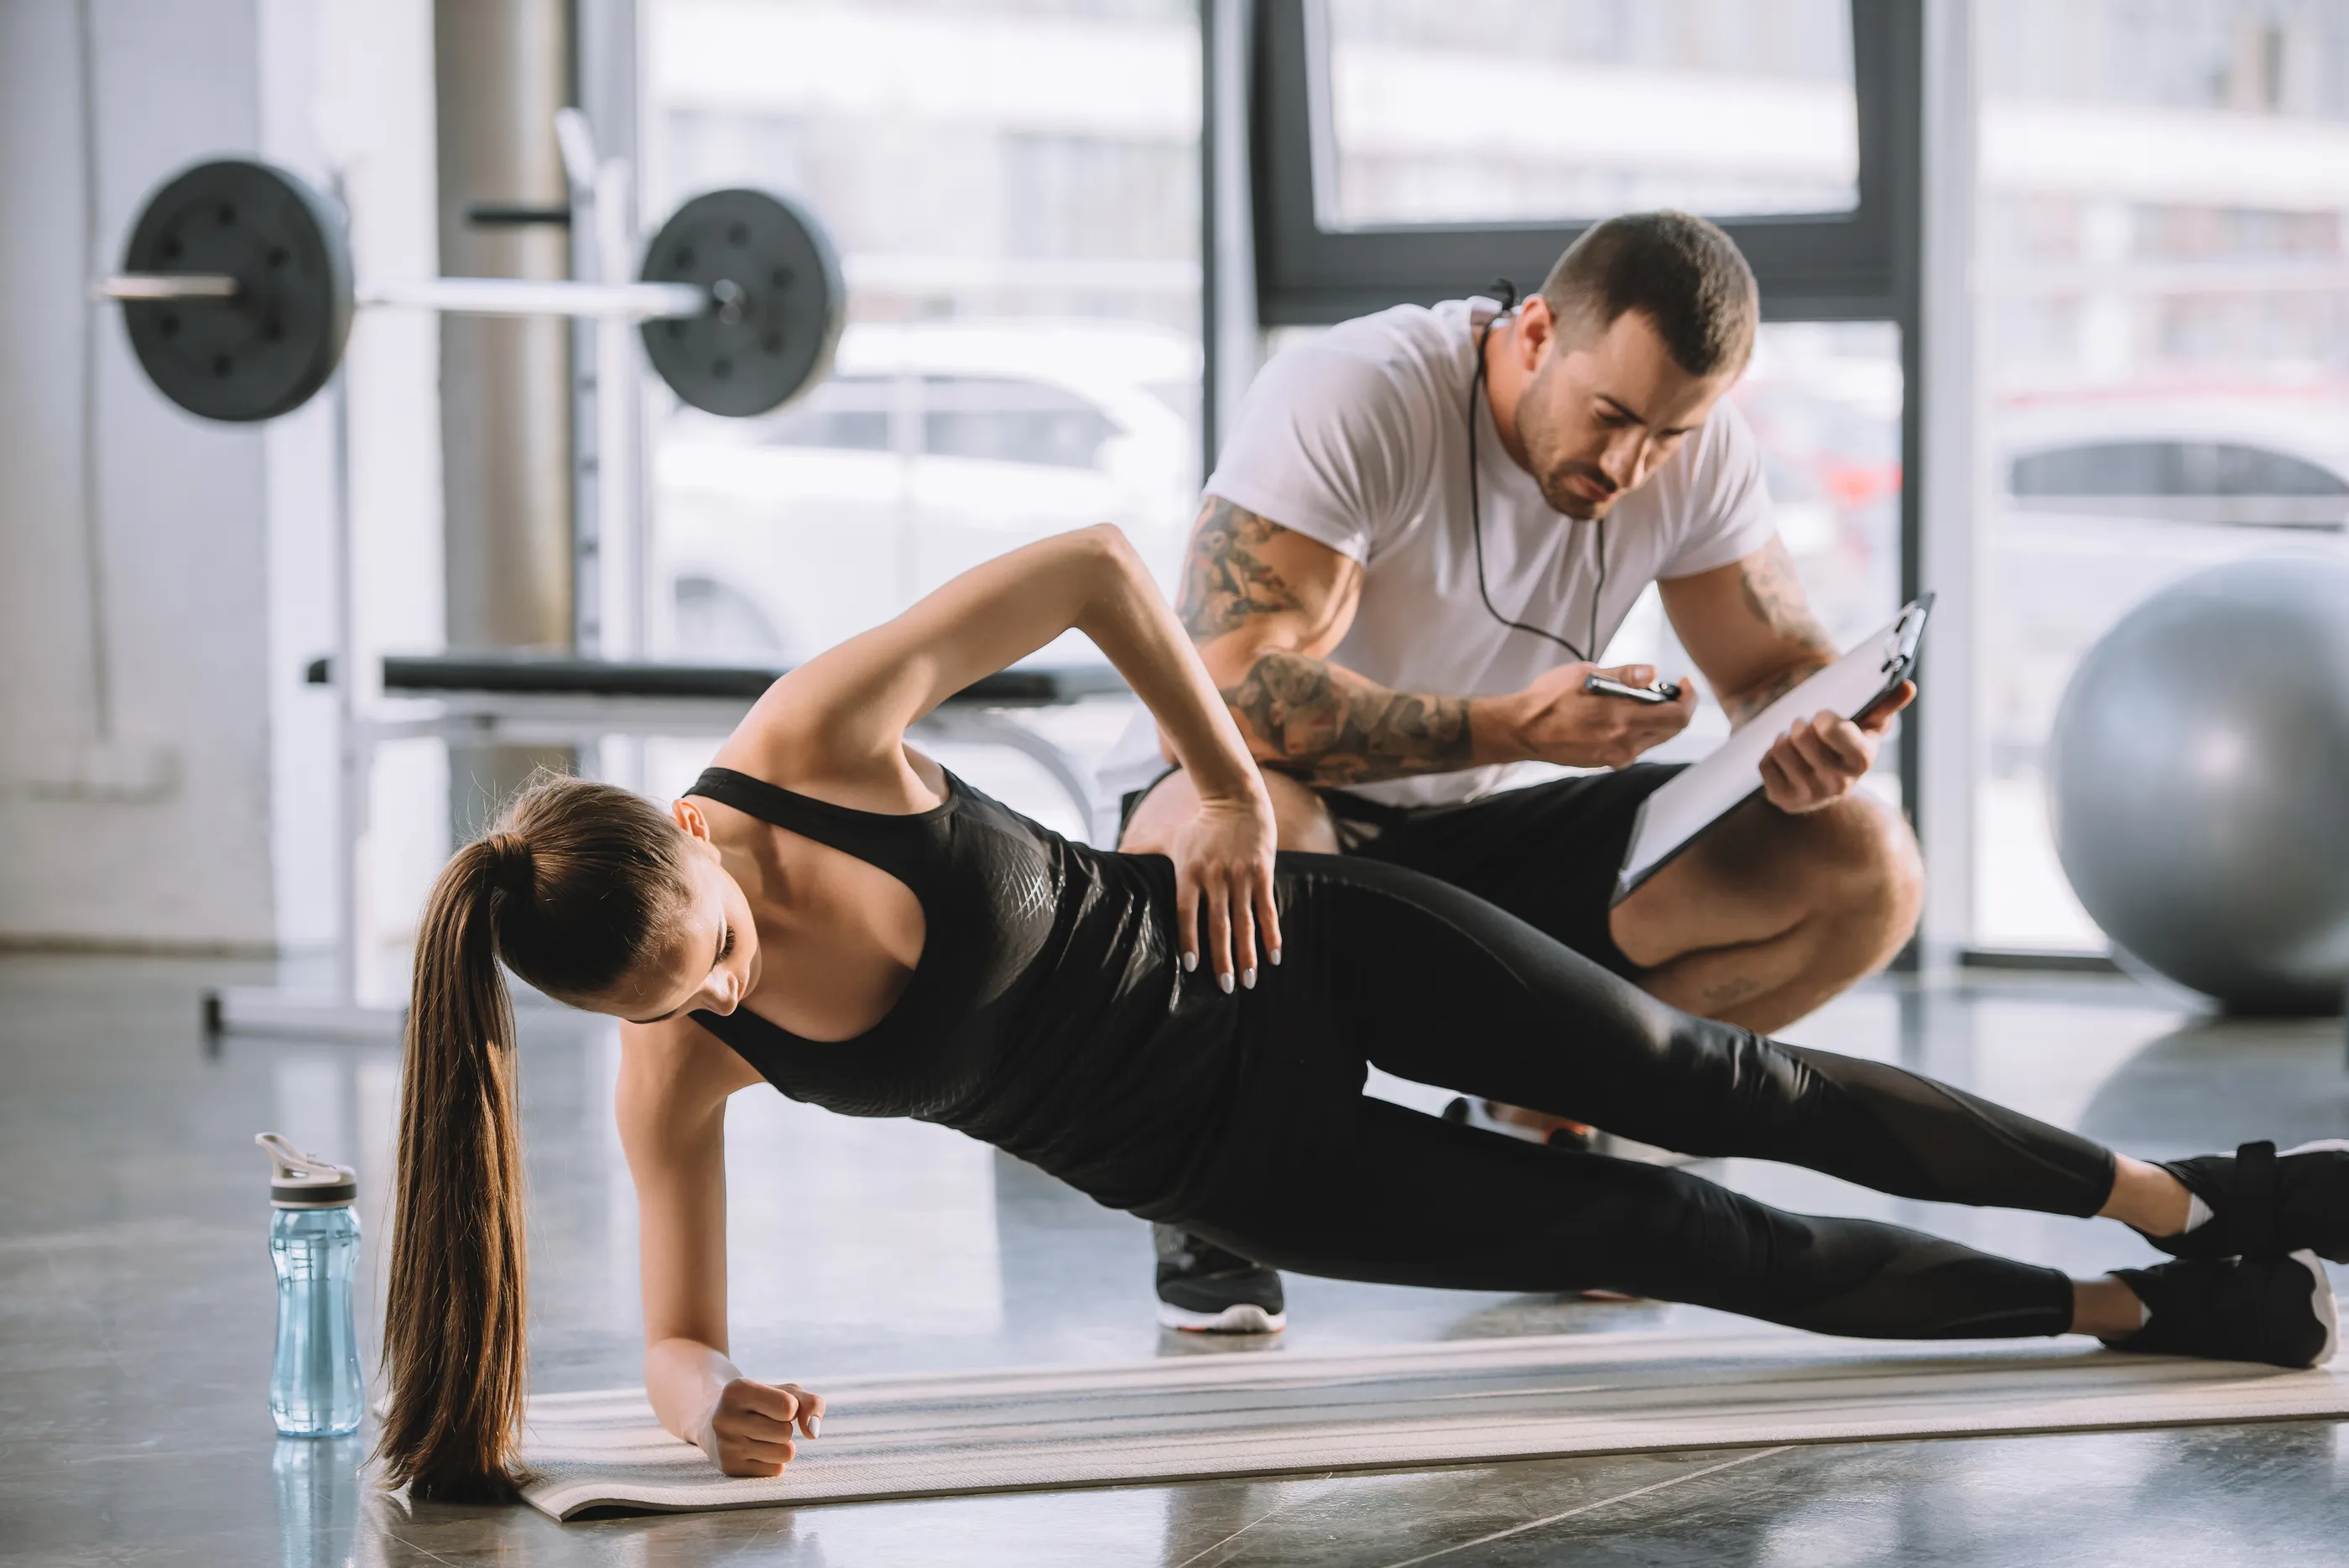 Want To Become A Personal Trainer? Here's How To Pass The ACE Exam image